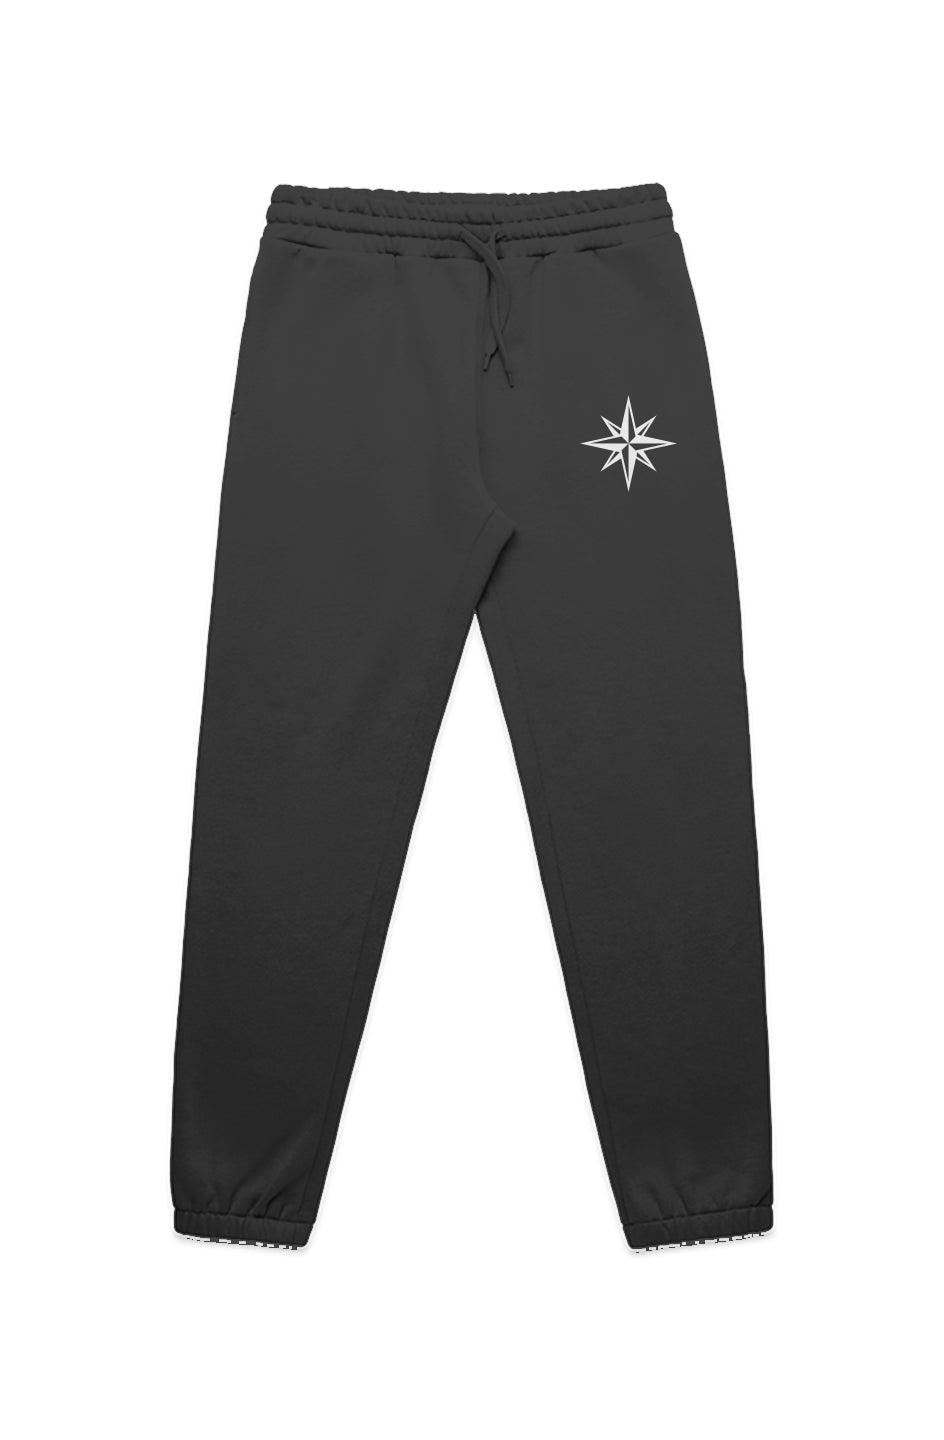 Compass Rose Icon Embroidered Track Pants